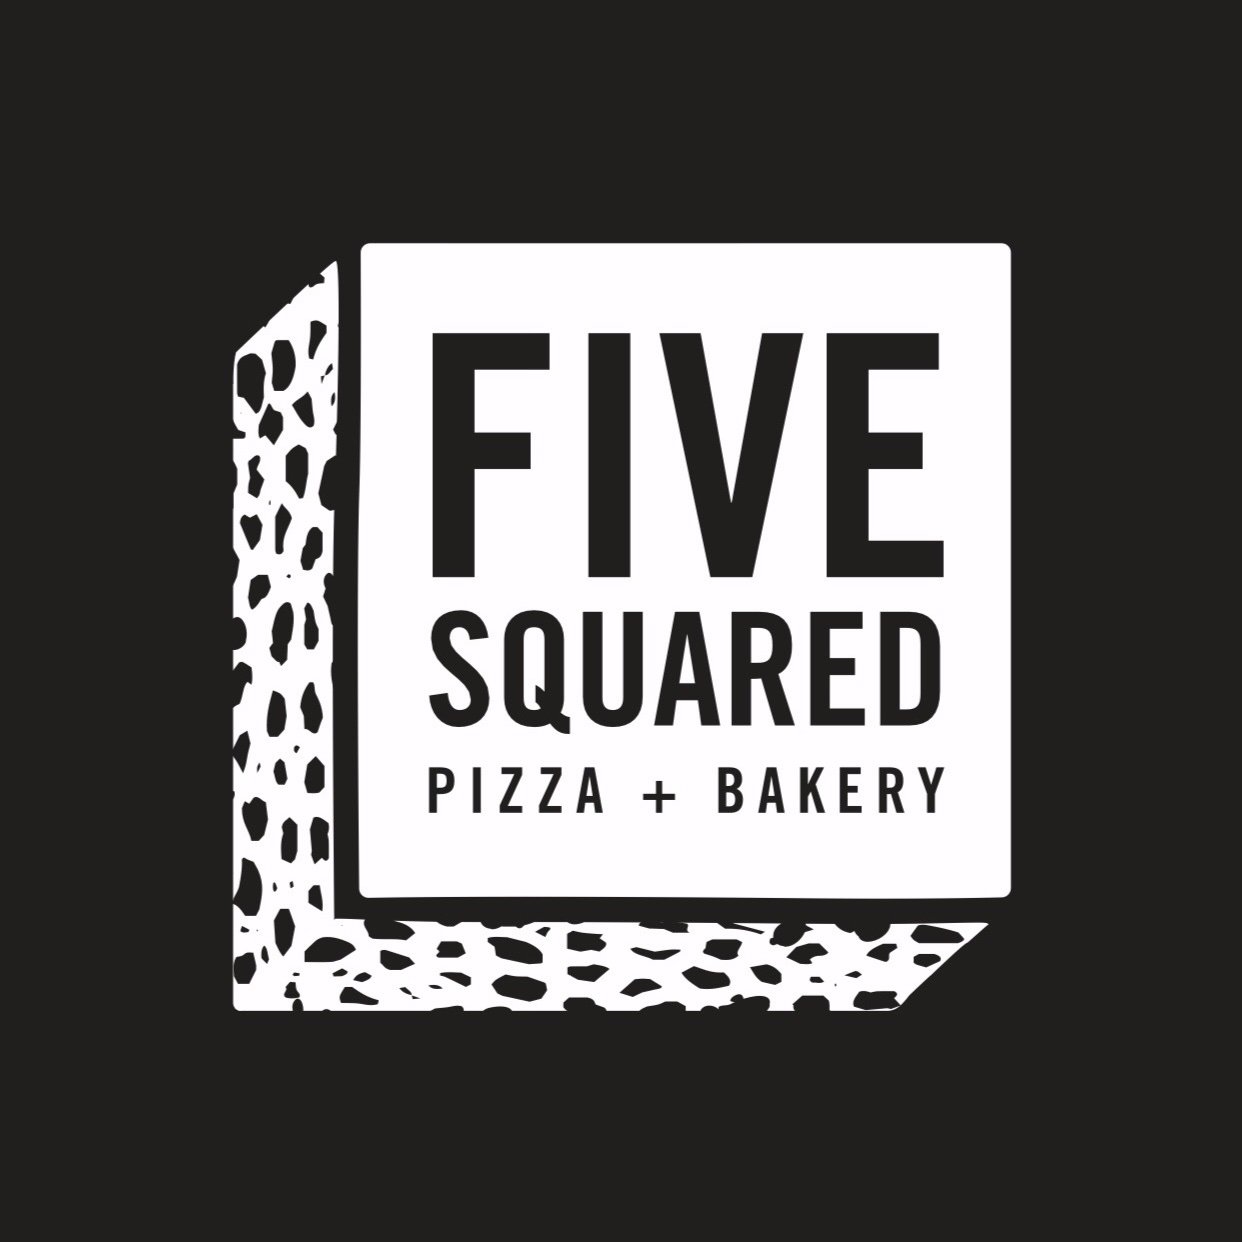 Chicago based food truck specializing in Detroit-Style 5” pizza squares & baked goods. Follow us on Instagram! @fivesquaredfoodtruck. Need Catering? Click below